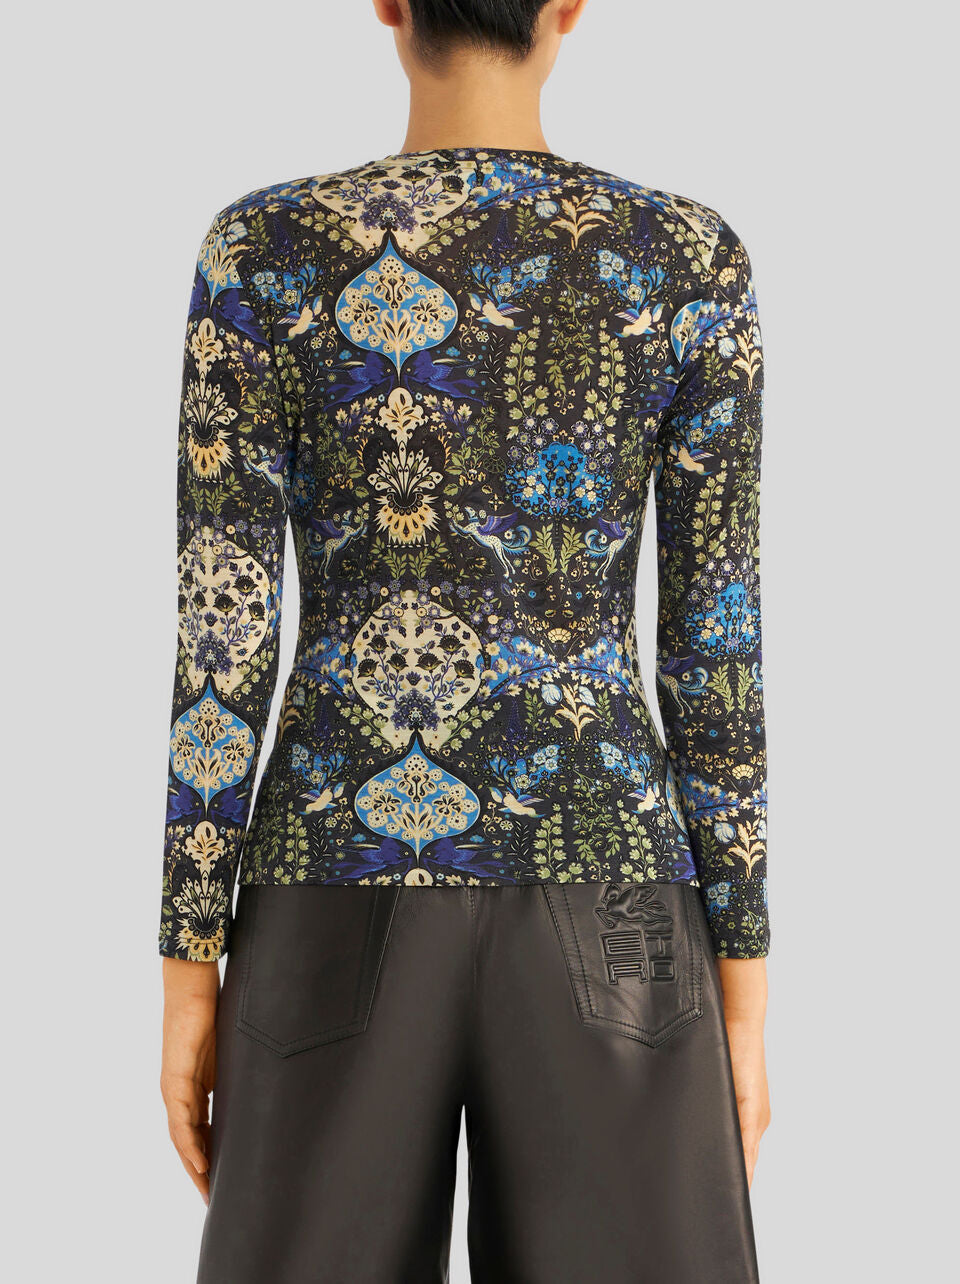 JERSEY JUMPER WITH FLORAL PRINT AND PEGASO - Black Multi